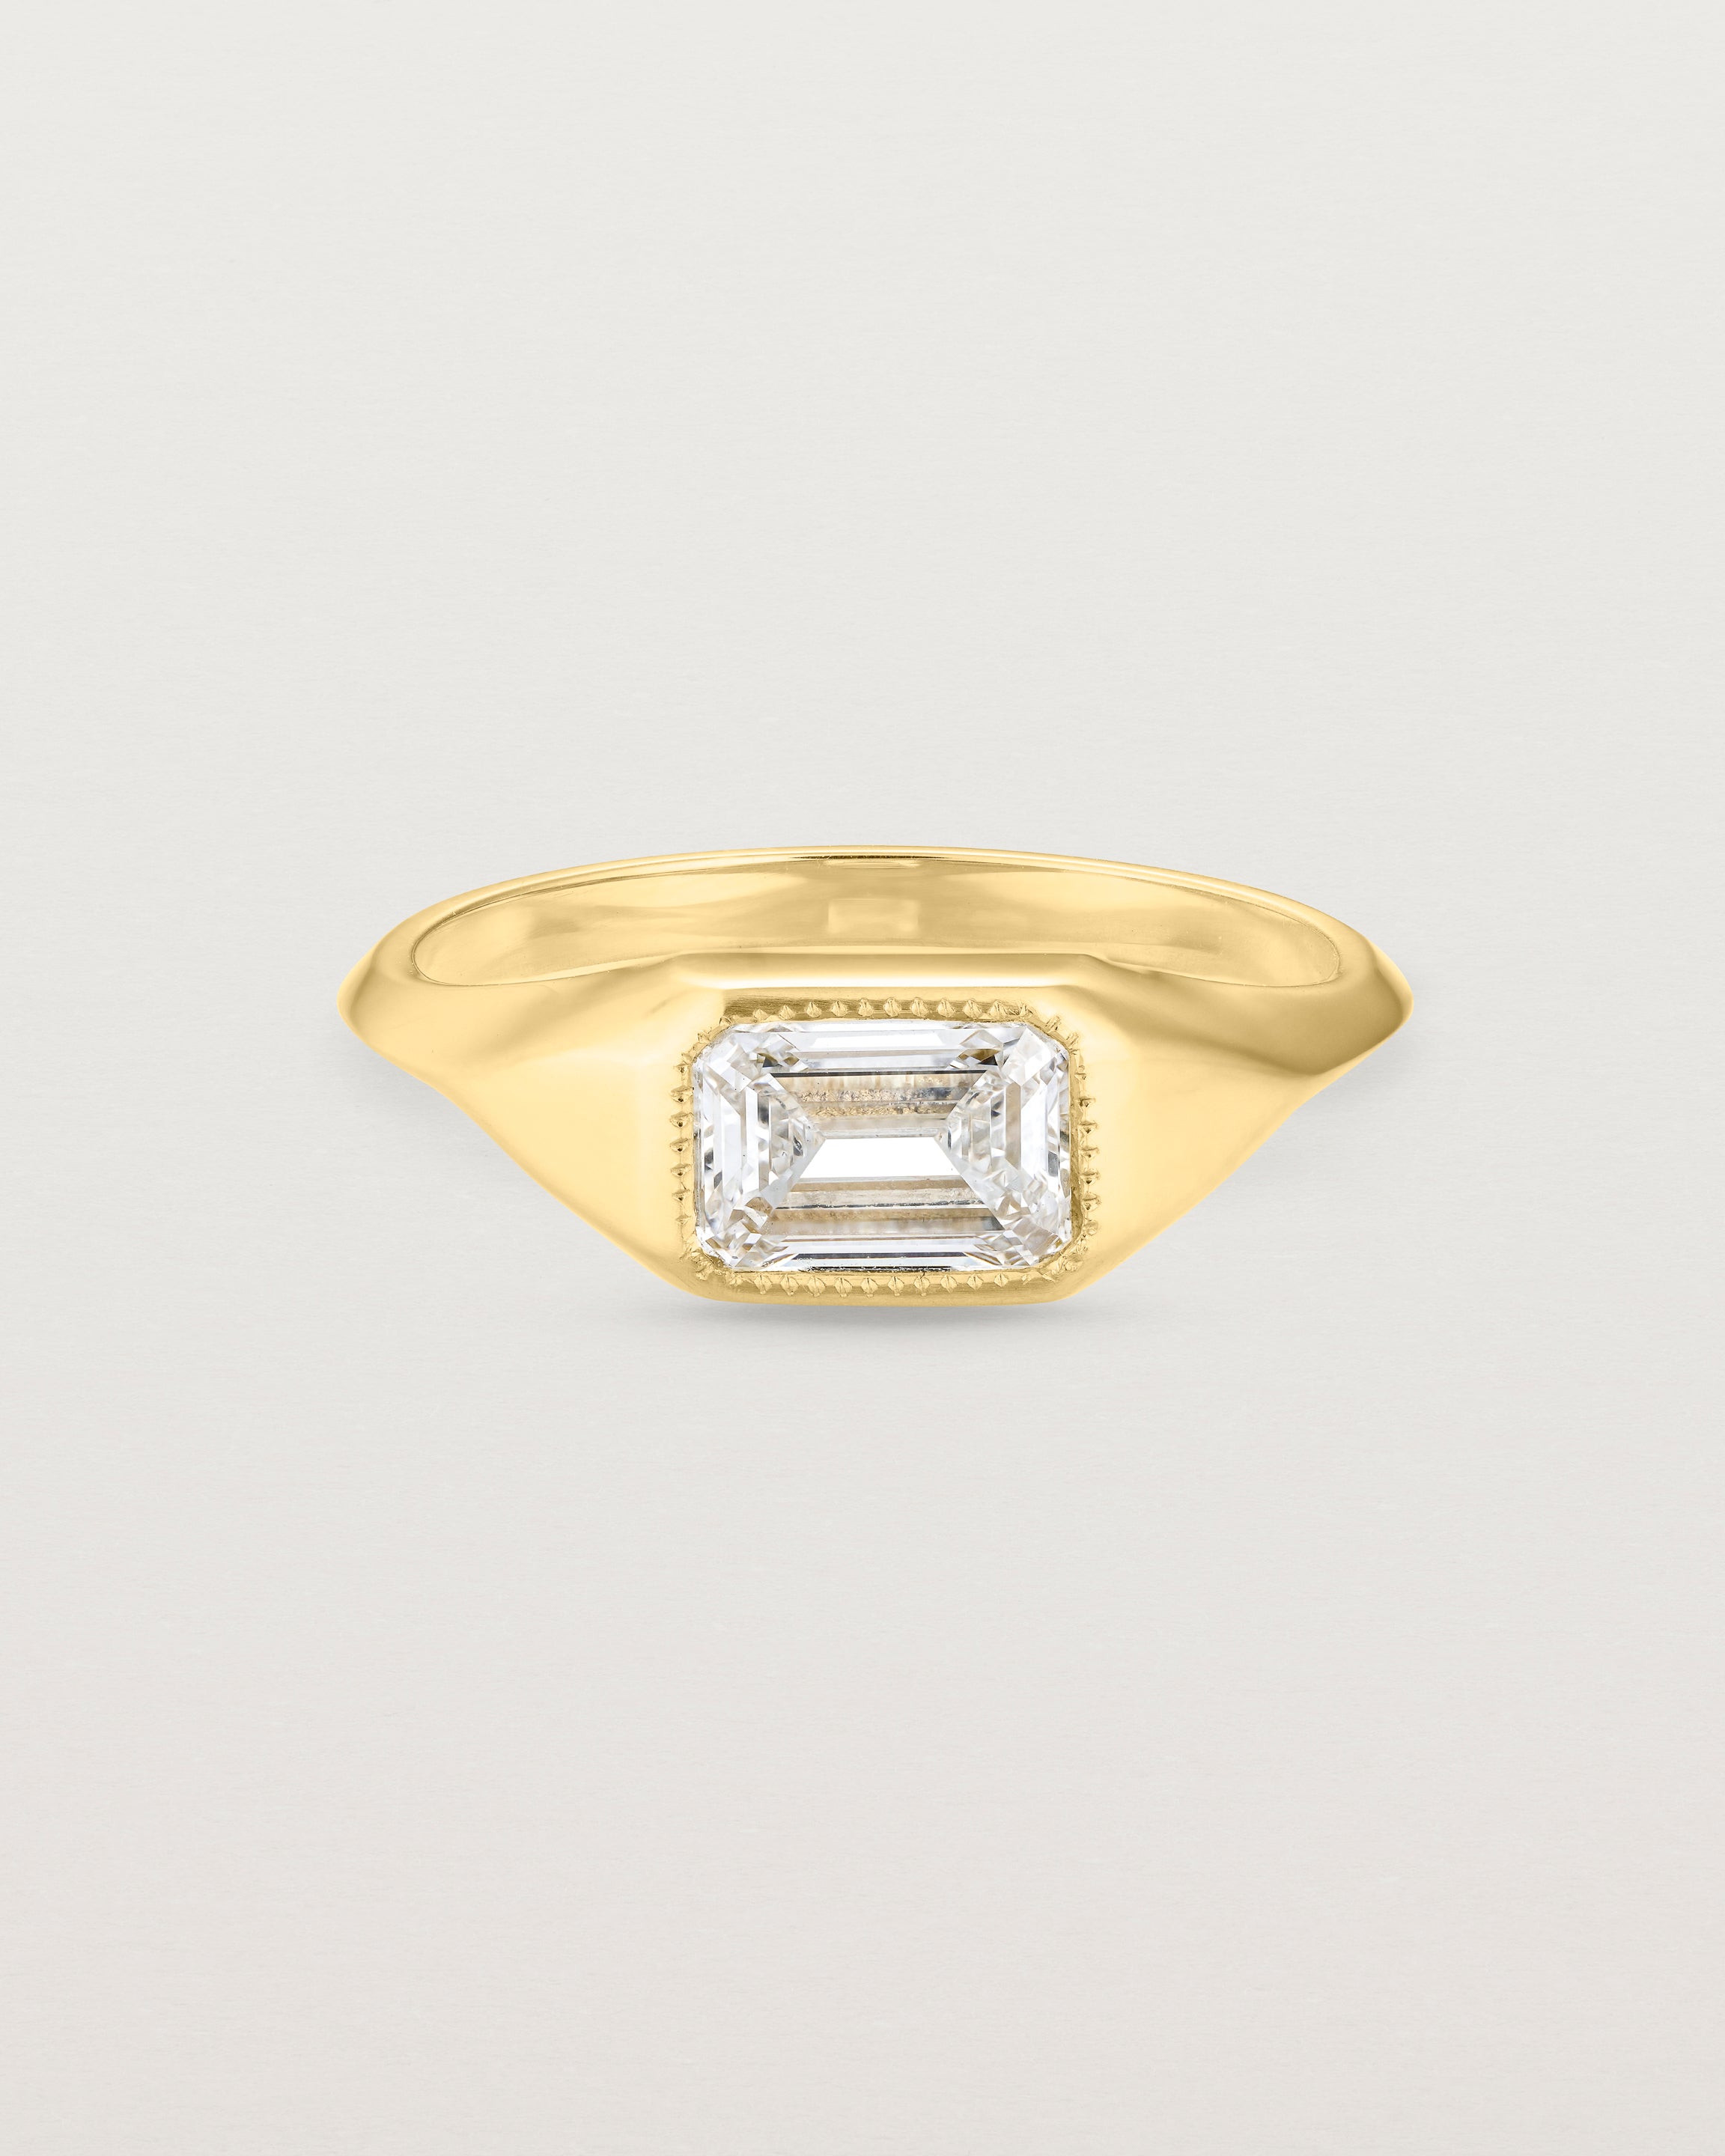 Front view of the Átlas Emerald Signet | Laboratory Grown Diamond in yellow gold with a polished finish. _label: Polished Finish Example